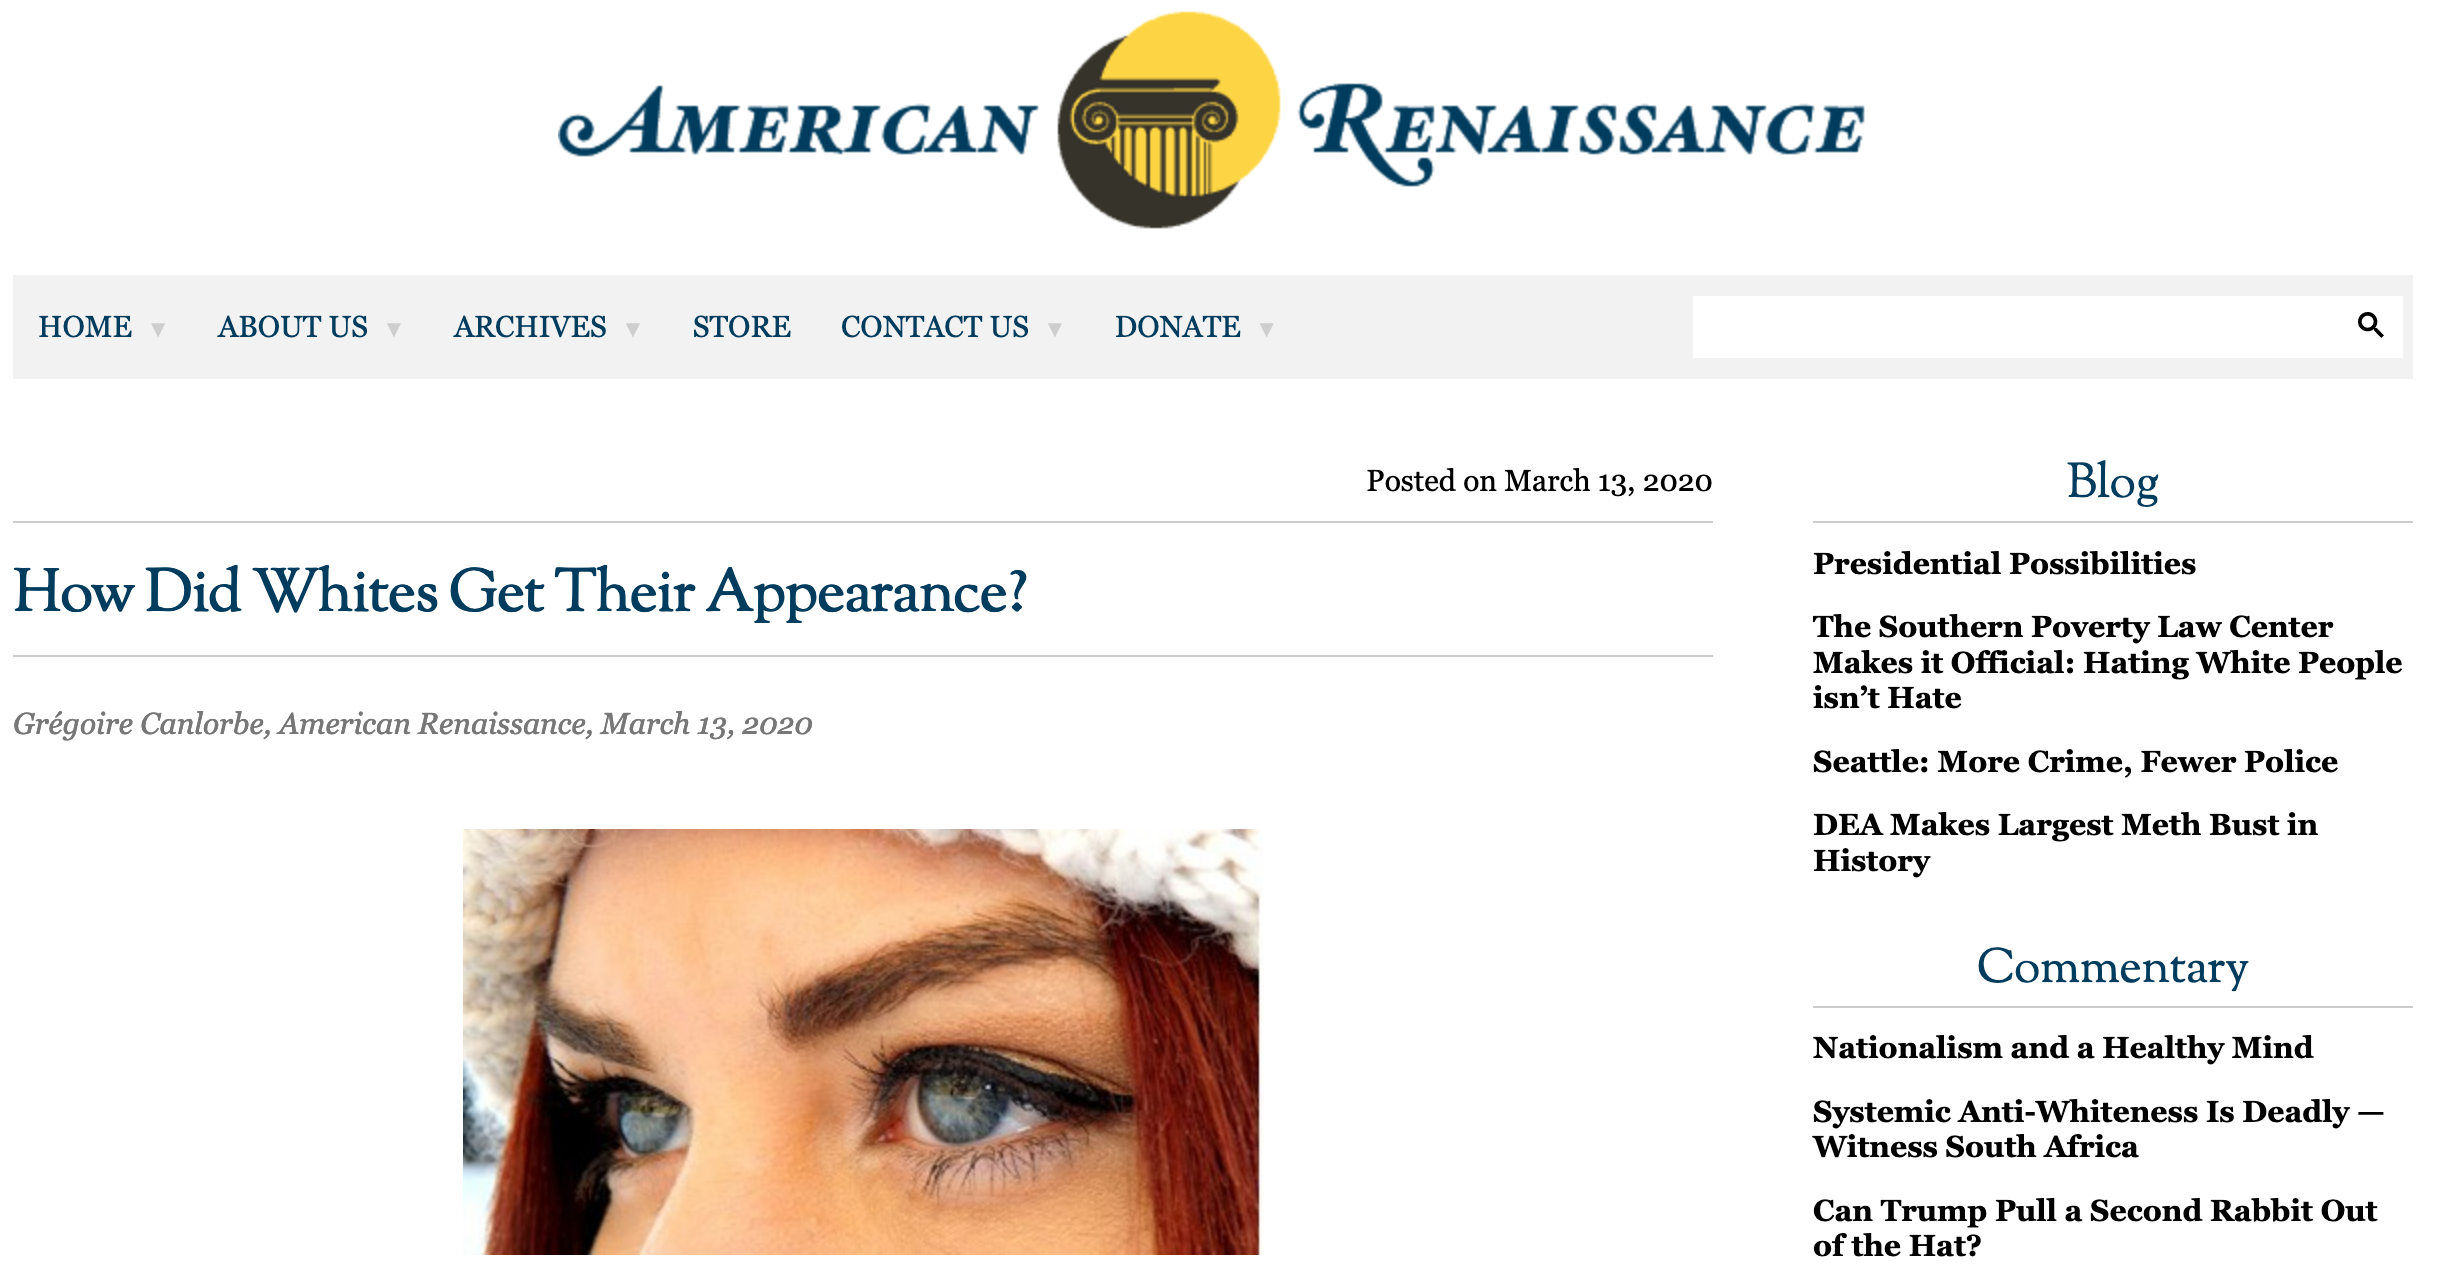 A screenshot of the article "How Did Whites Get Their Appearance" on the American Renaissance website, featuring an image of a white woman with red hair and blue eyes.